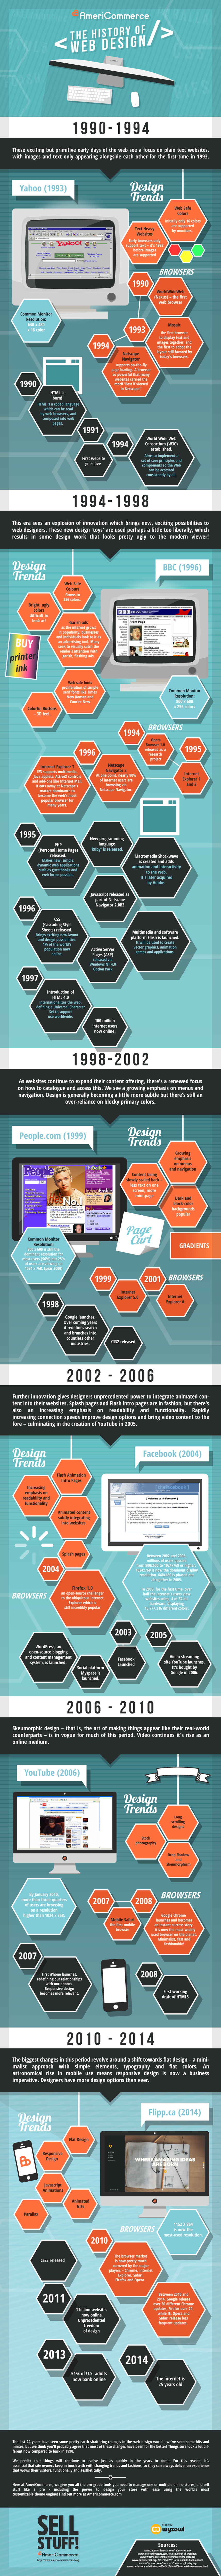 The History of Web Design